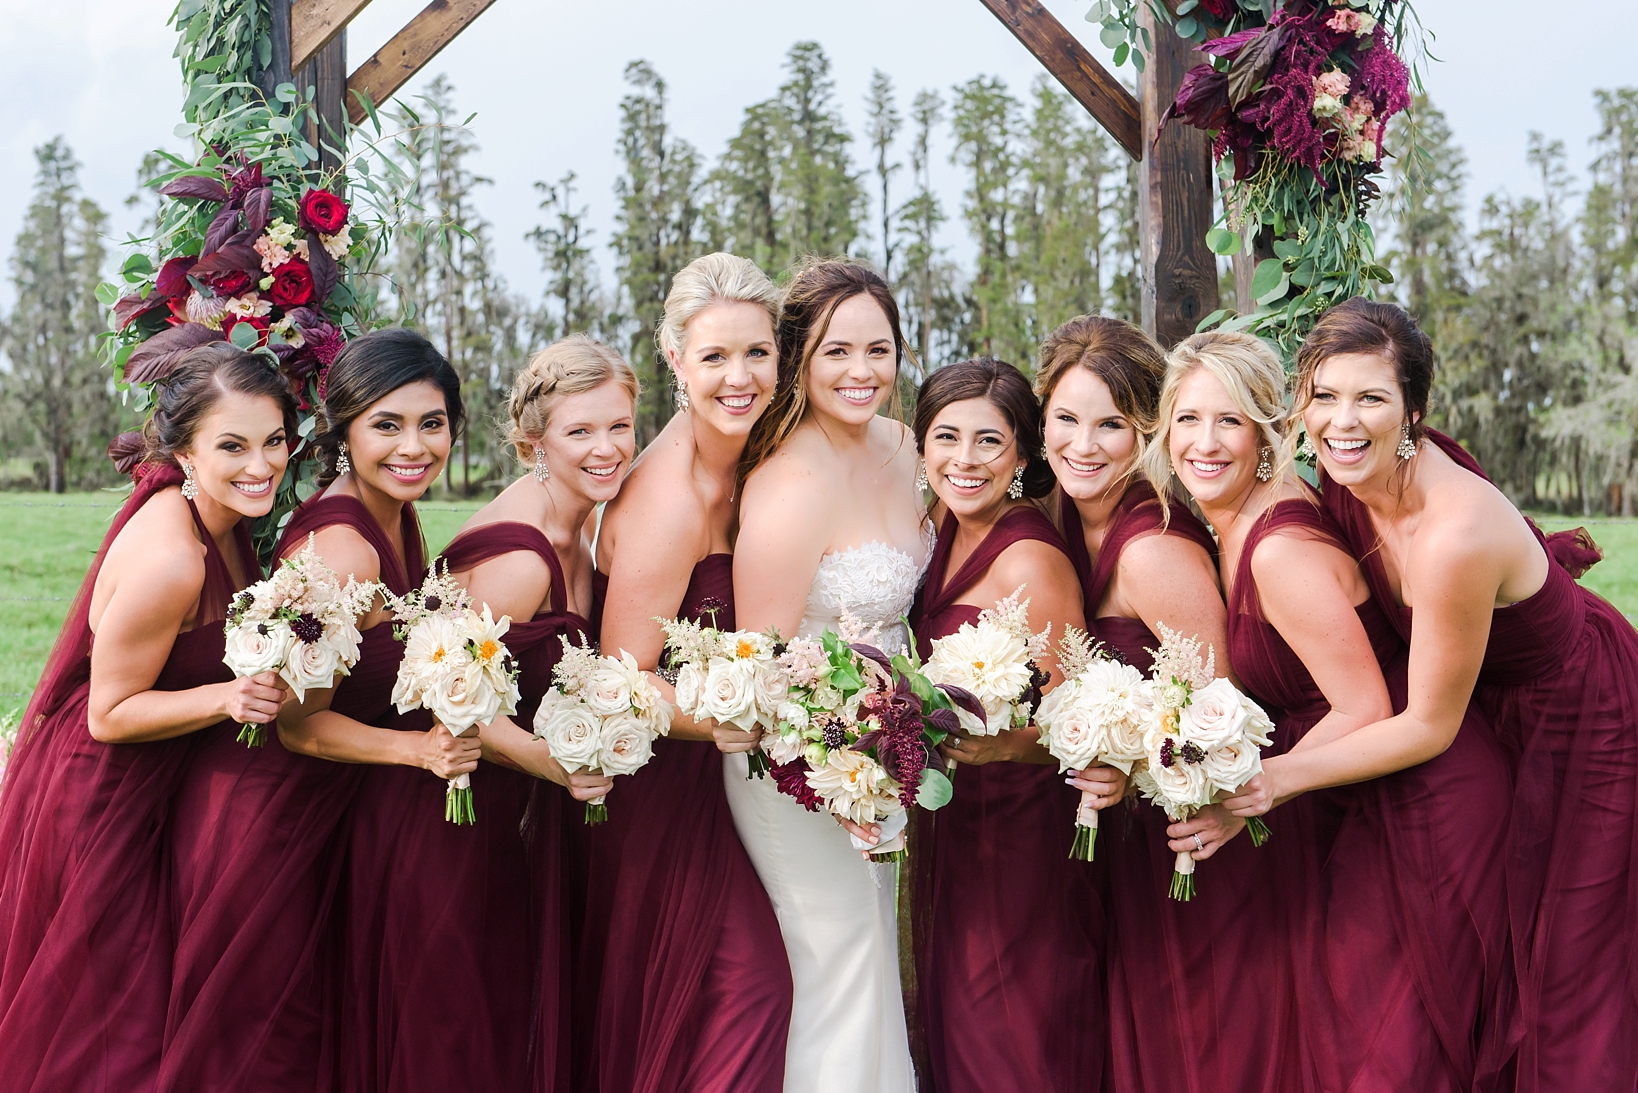 Bride and her bridesmaids at the wedding arch holding floral bouquets